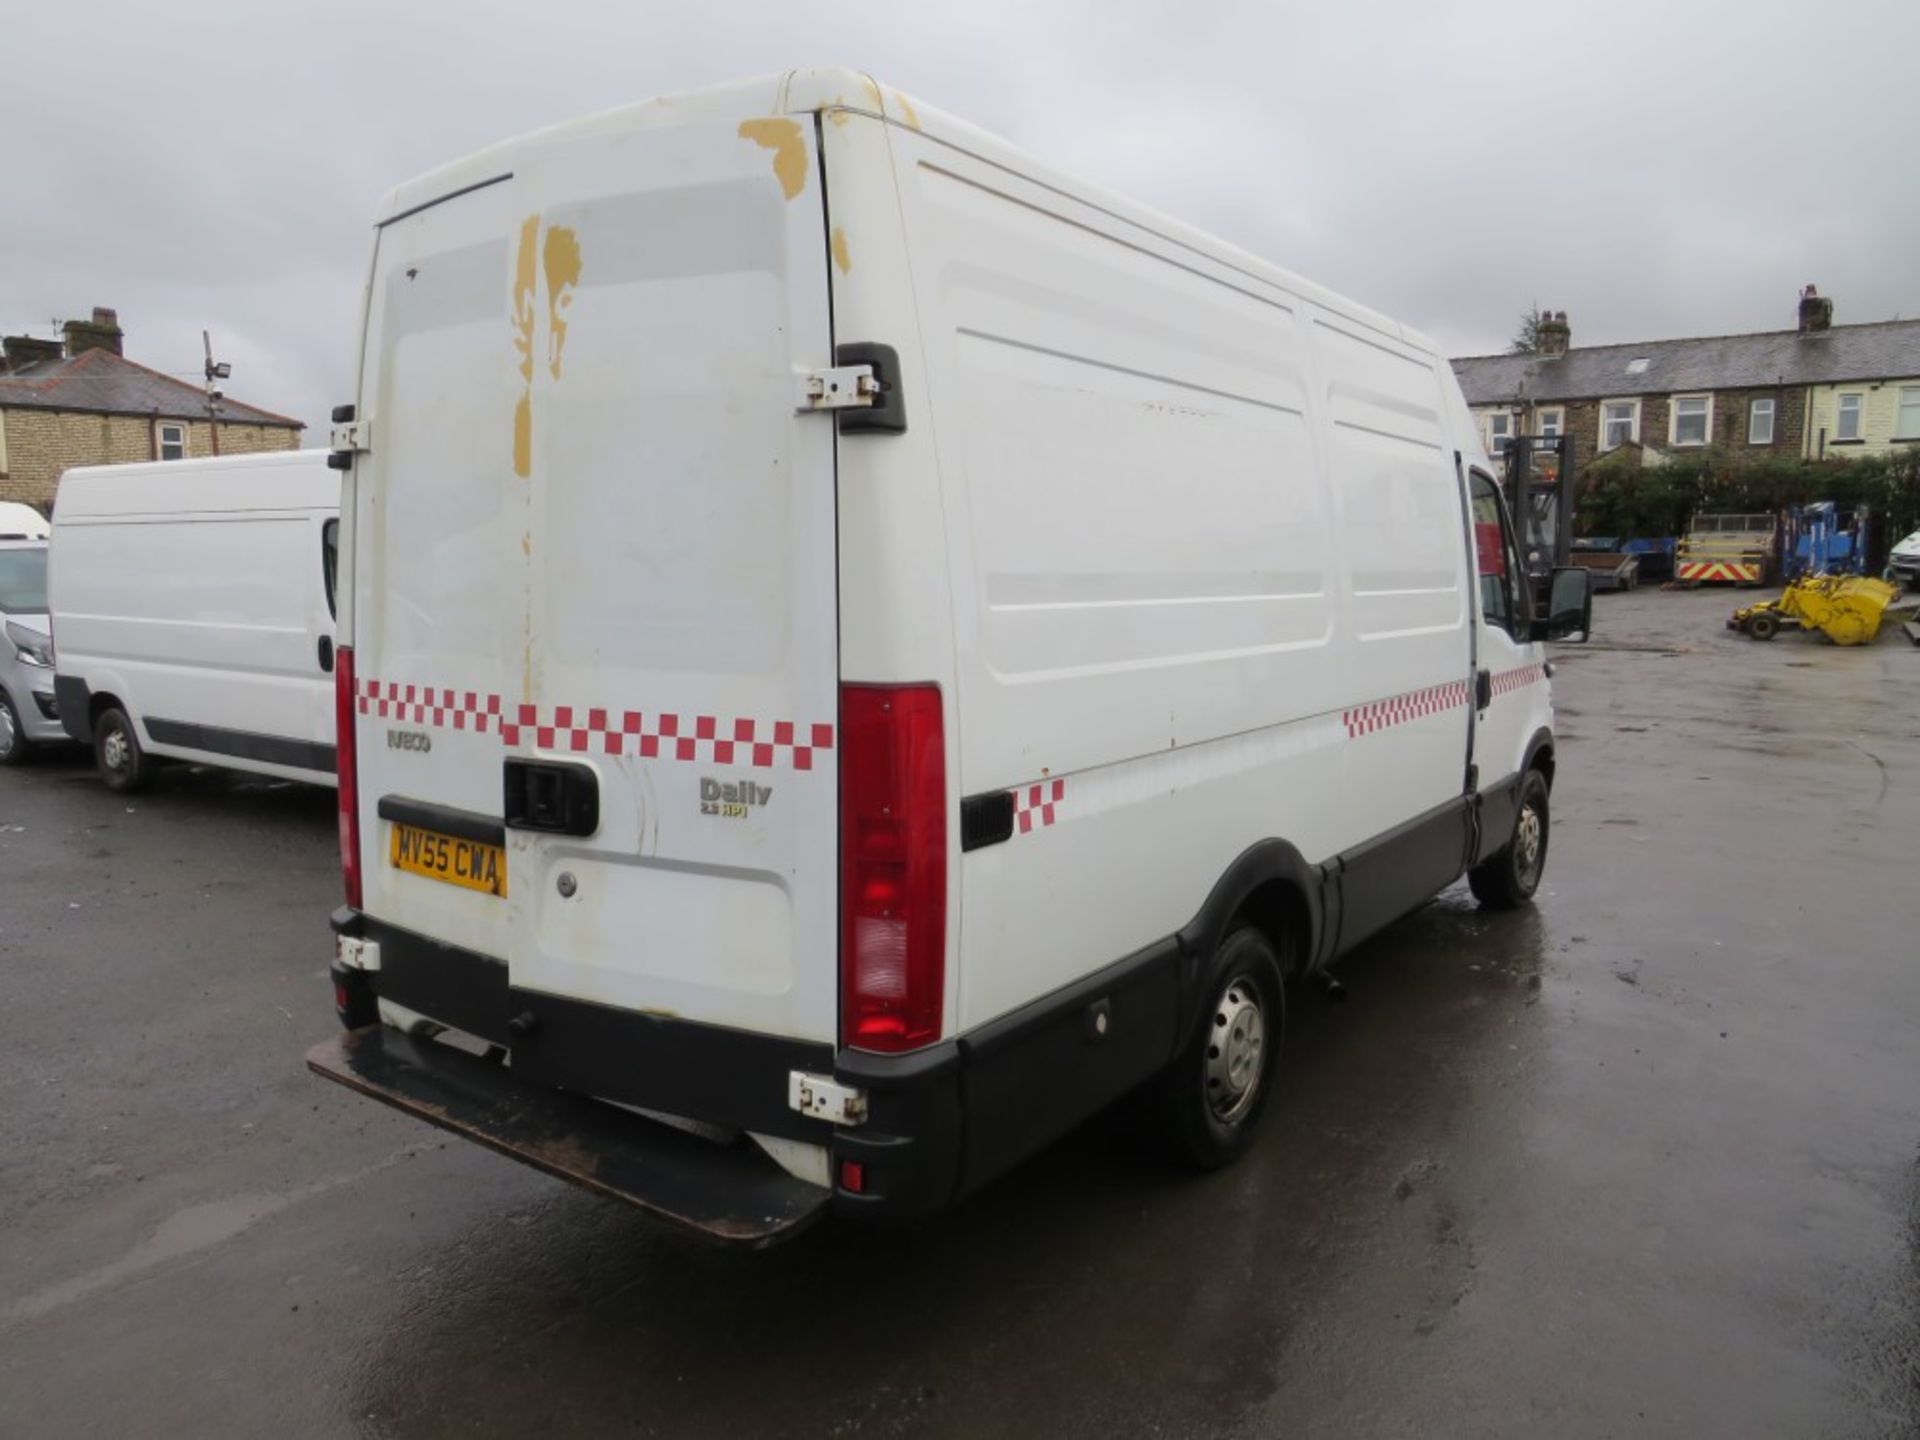 55 reg IVECO DAILY 35S12 MWB (DIRECT GTR M/C FIRE) 1ST REG 02/06, 119550M, V5 HERE, 1 OWNER FROM NEW - Image 4 of 6